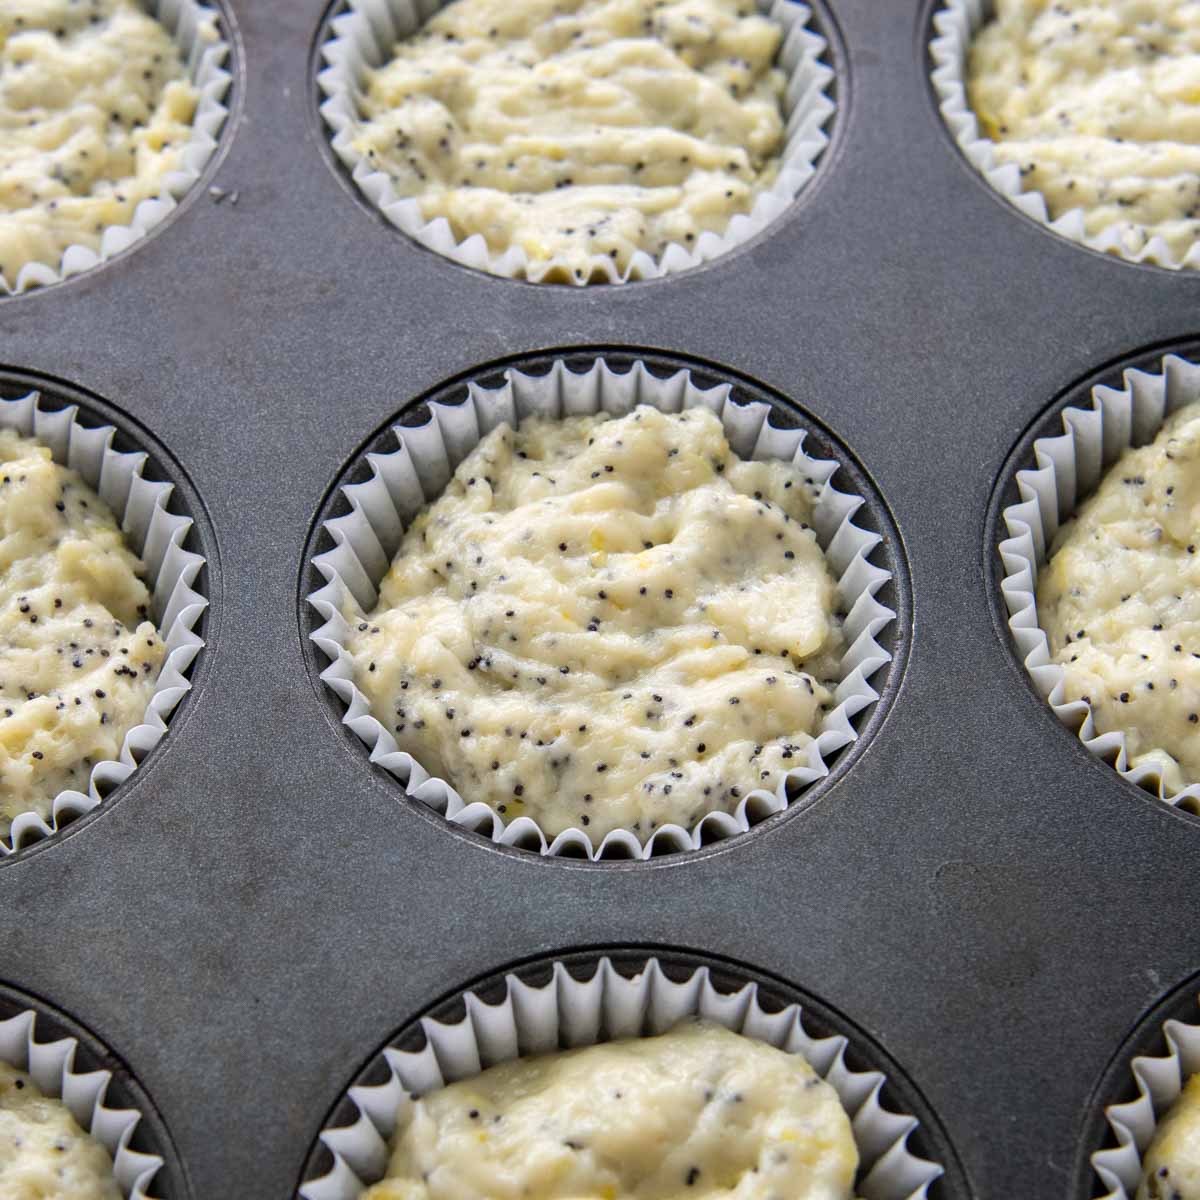 unbaked muffins in a muffin tin.